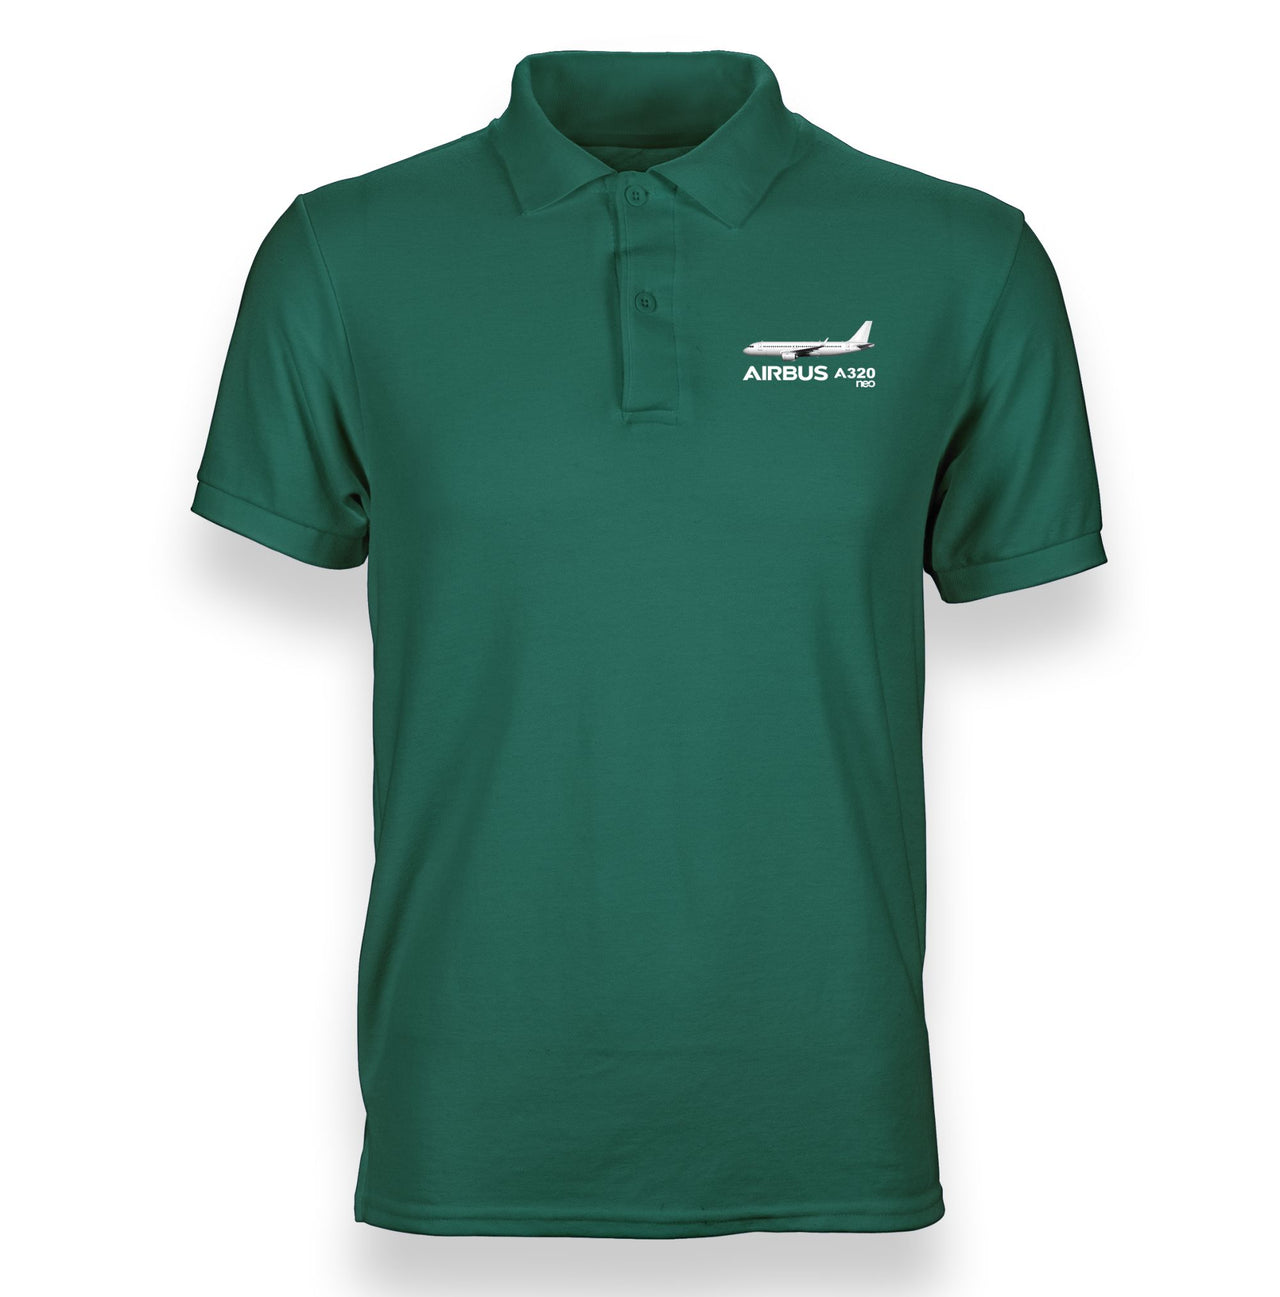 The Airbus A320Neo Designed "WOMEN" Polo T-Shirts